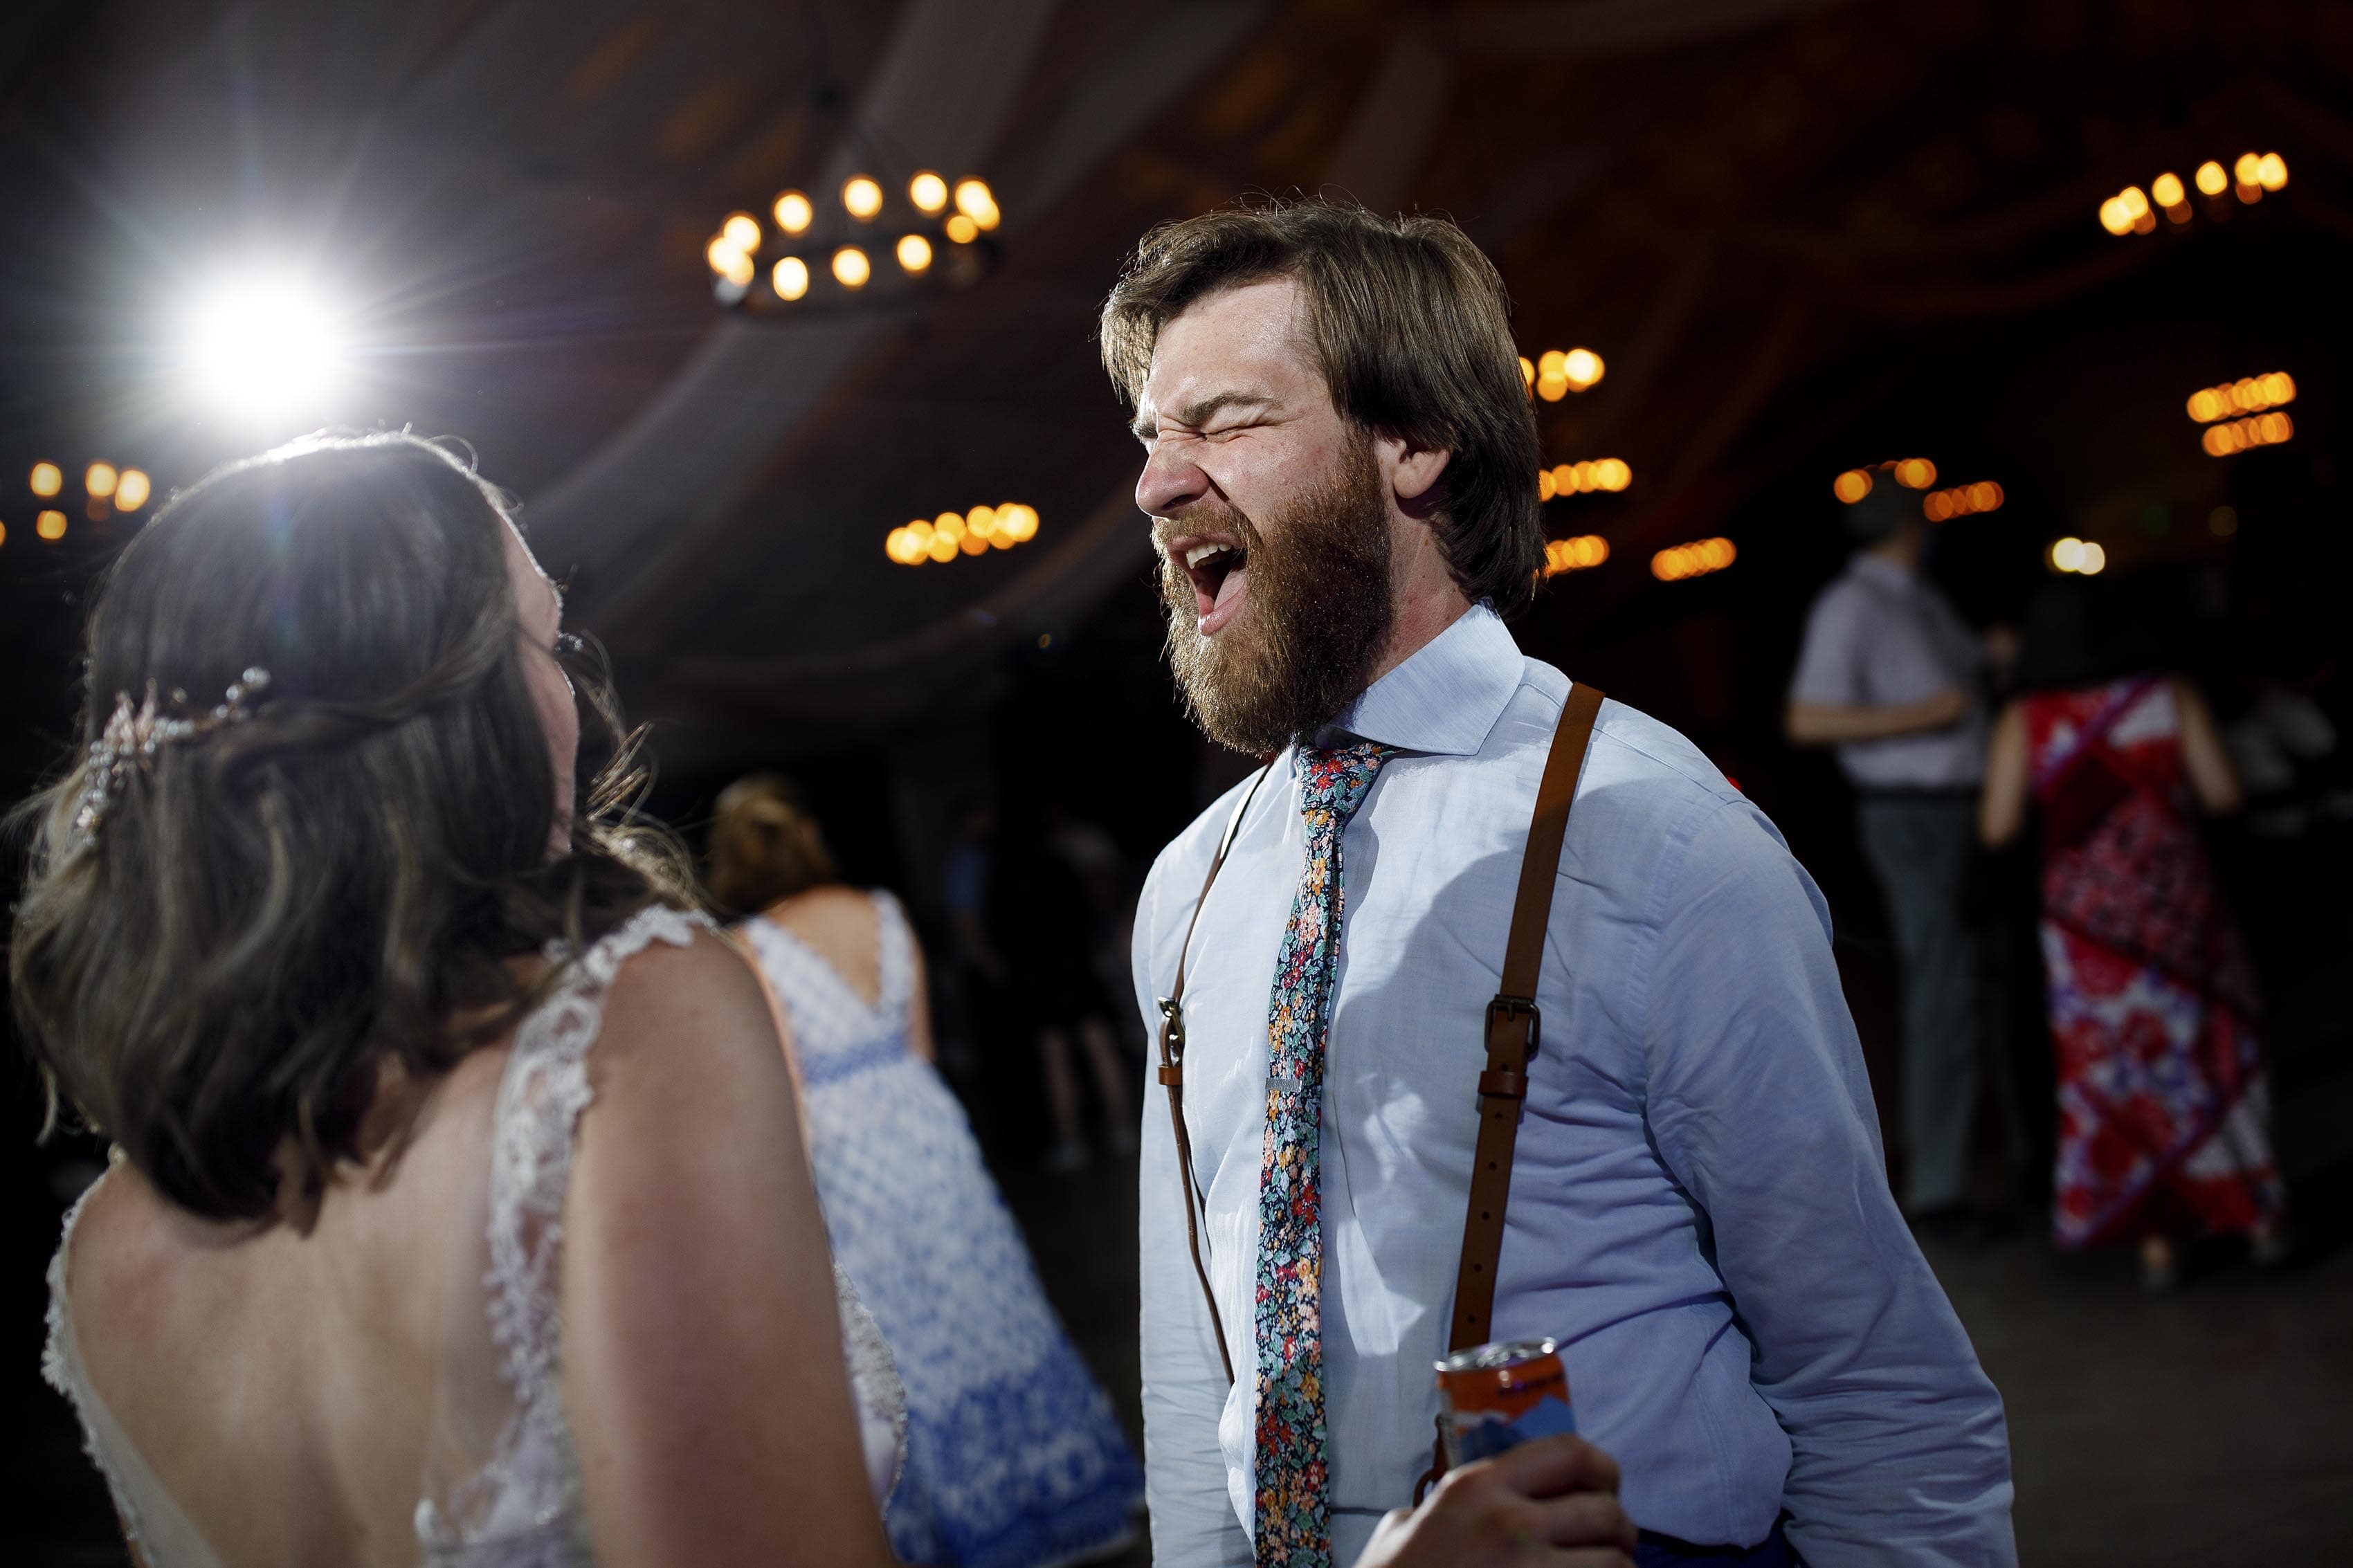 Wedding guests dance together at 4 Eagle Ranch